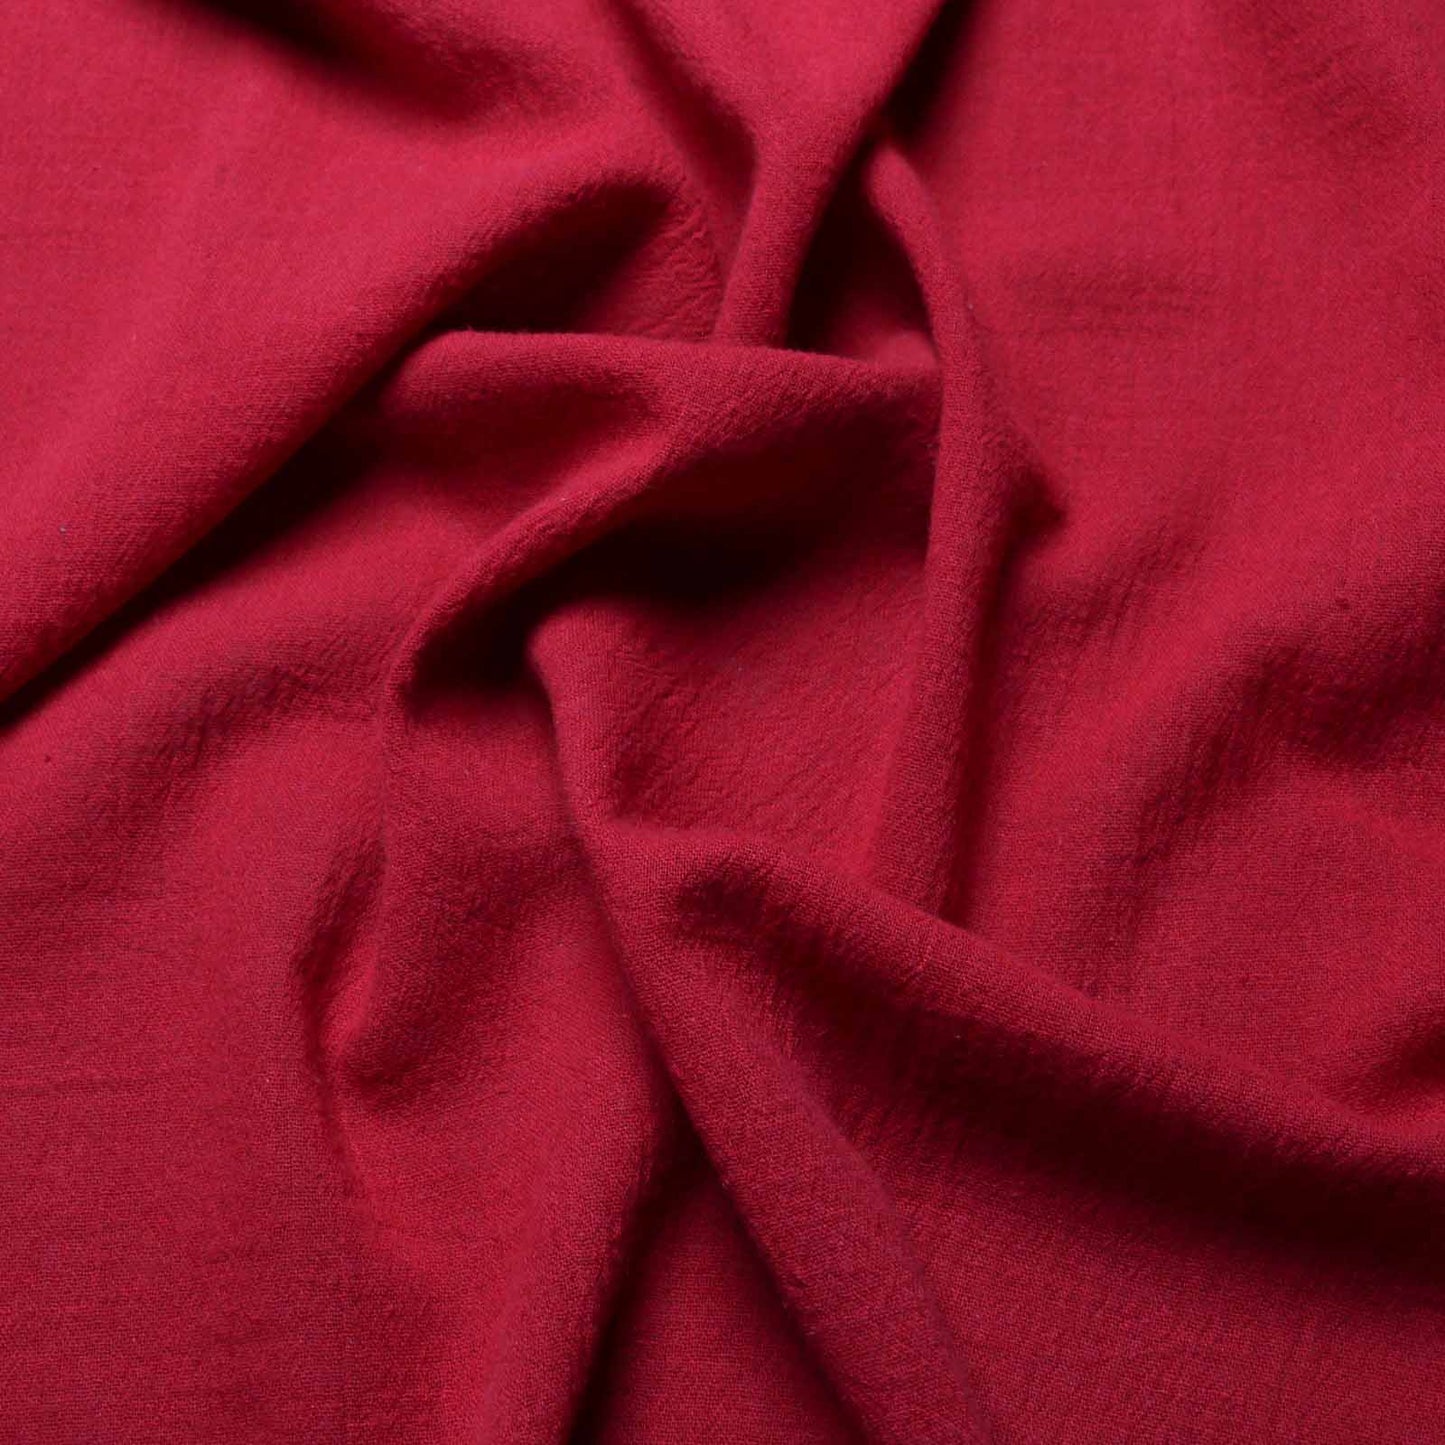 red cotton gauze dressmaking fabric with crinkle effect texture